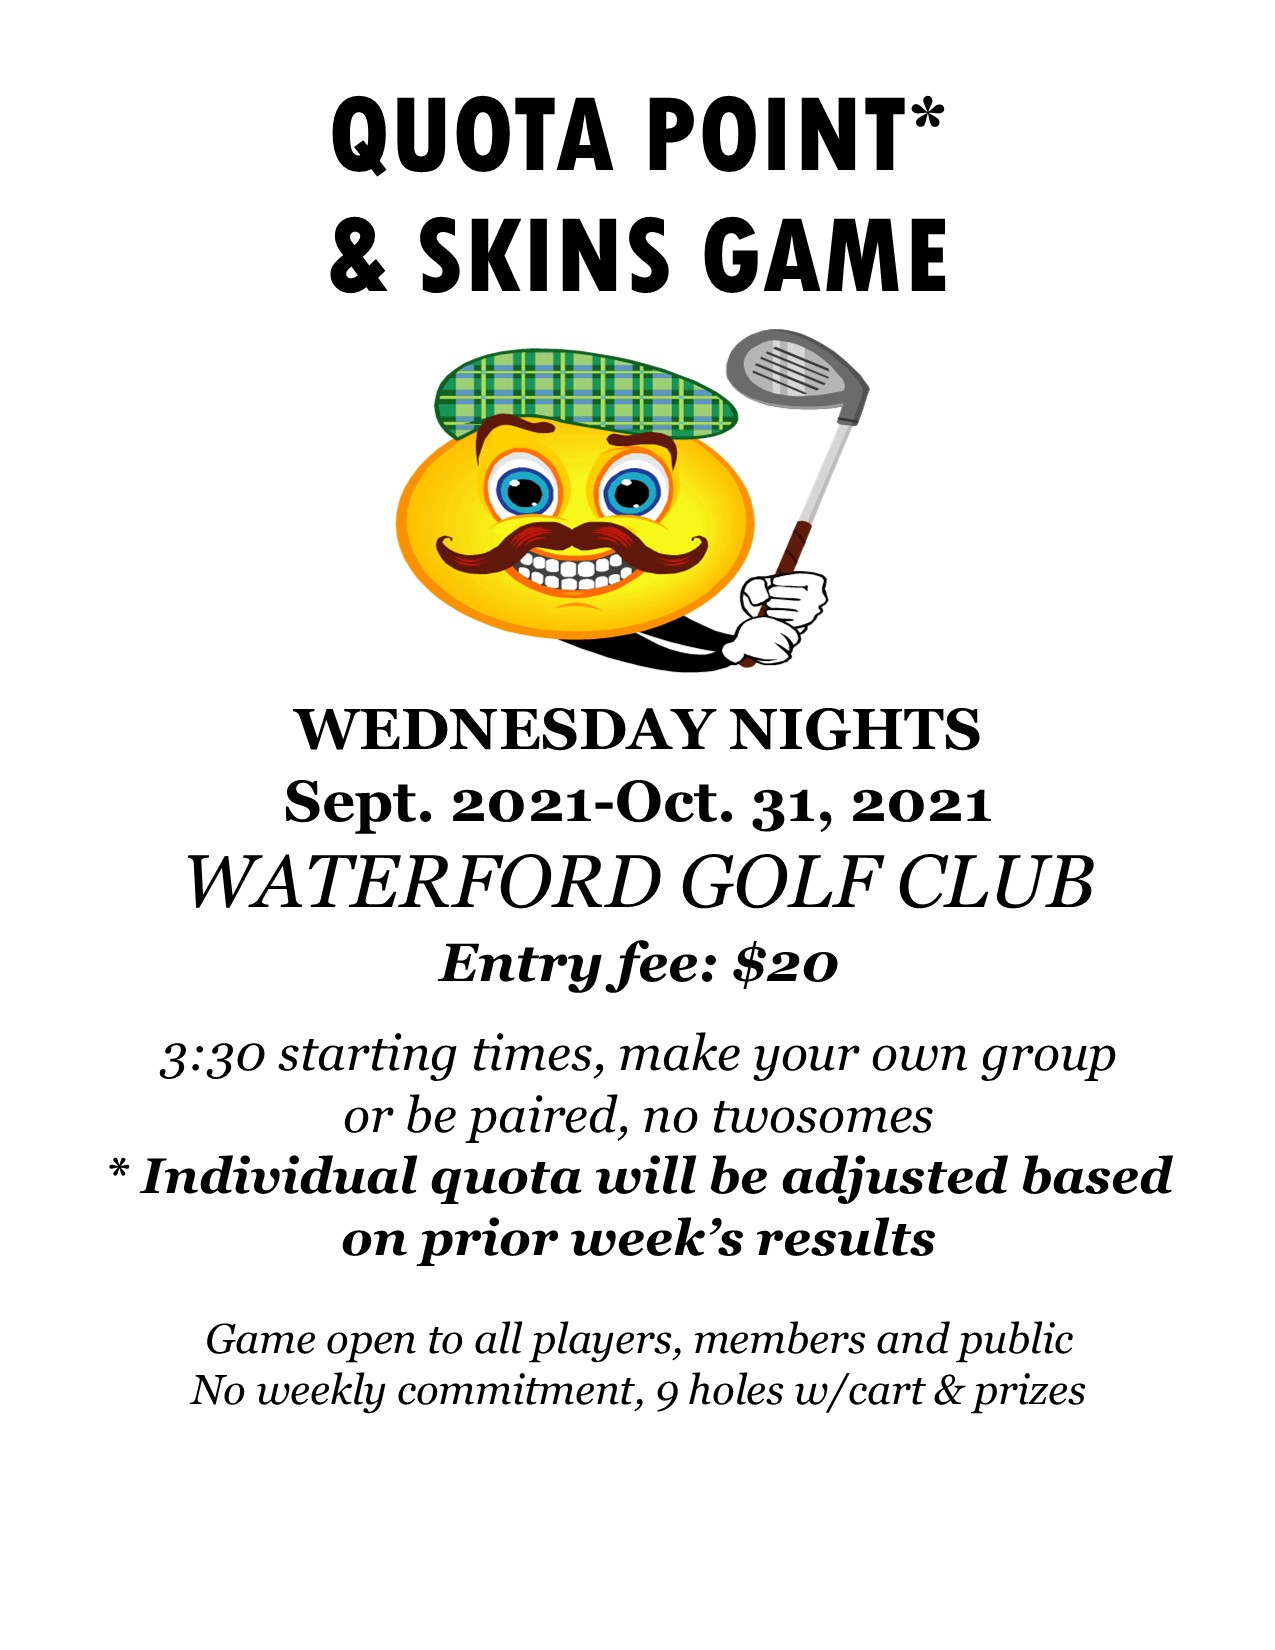 QUOTA POINT SKINS GAME Sept 2021 001